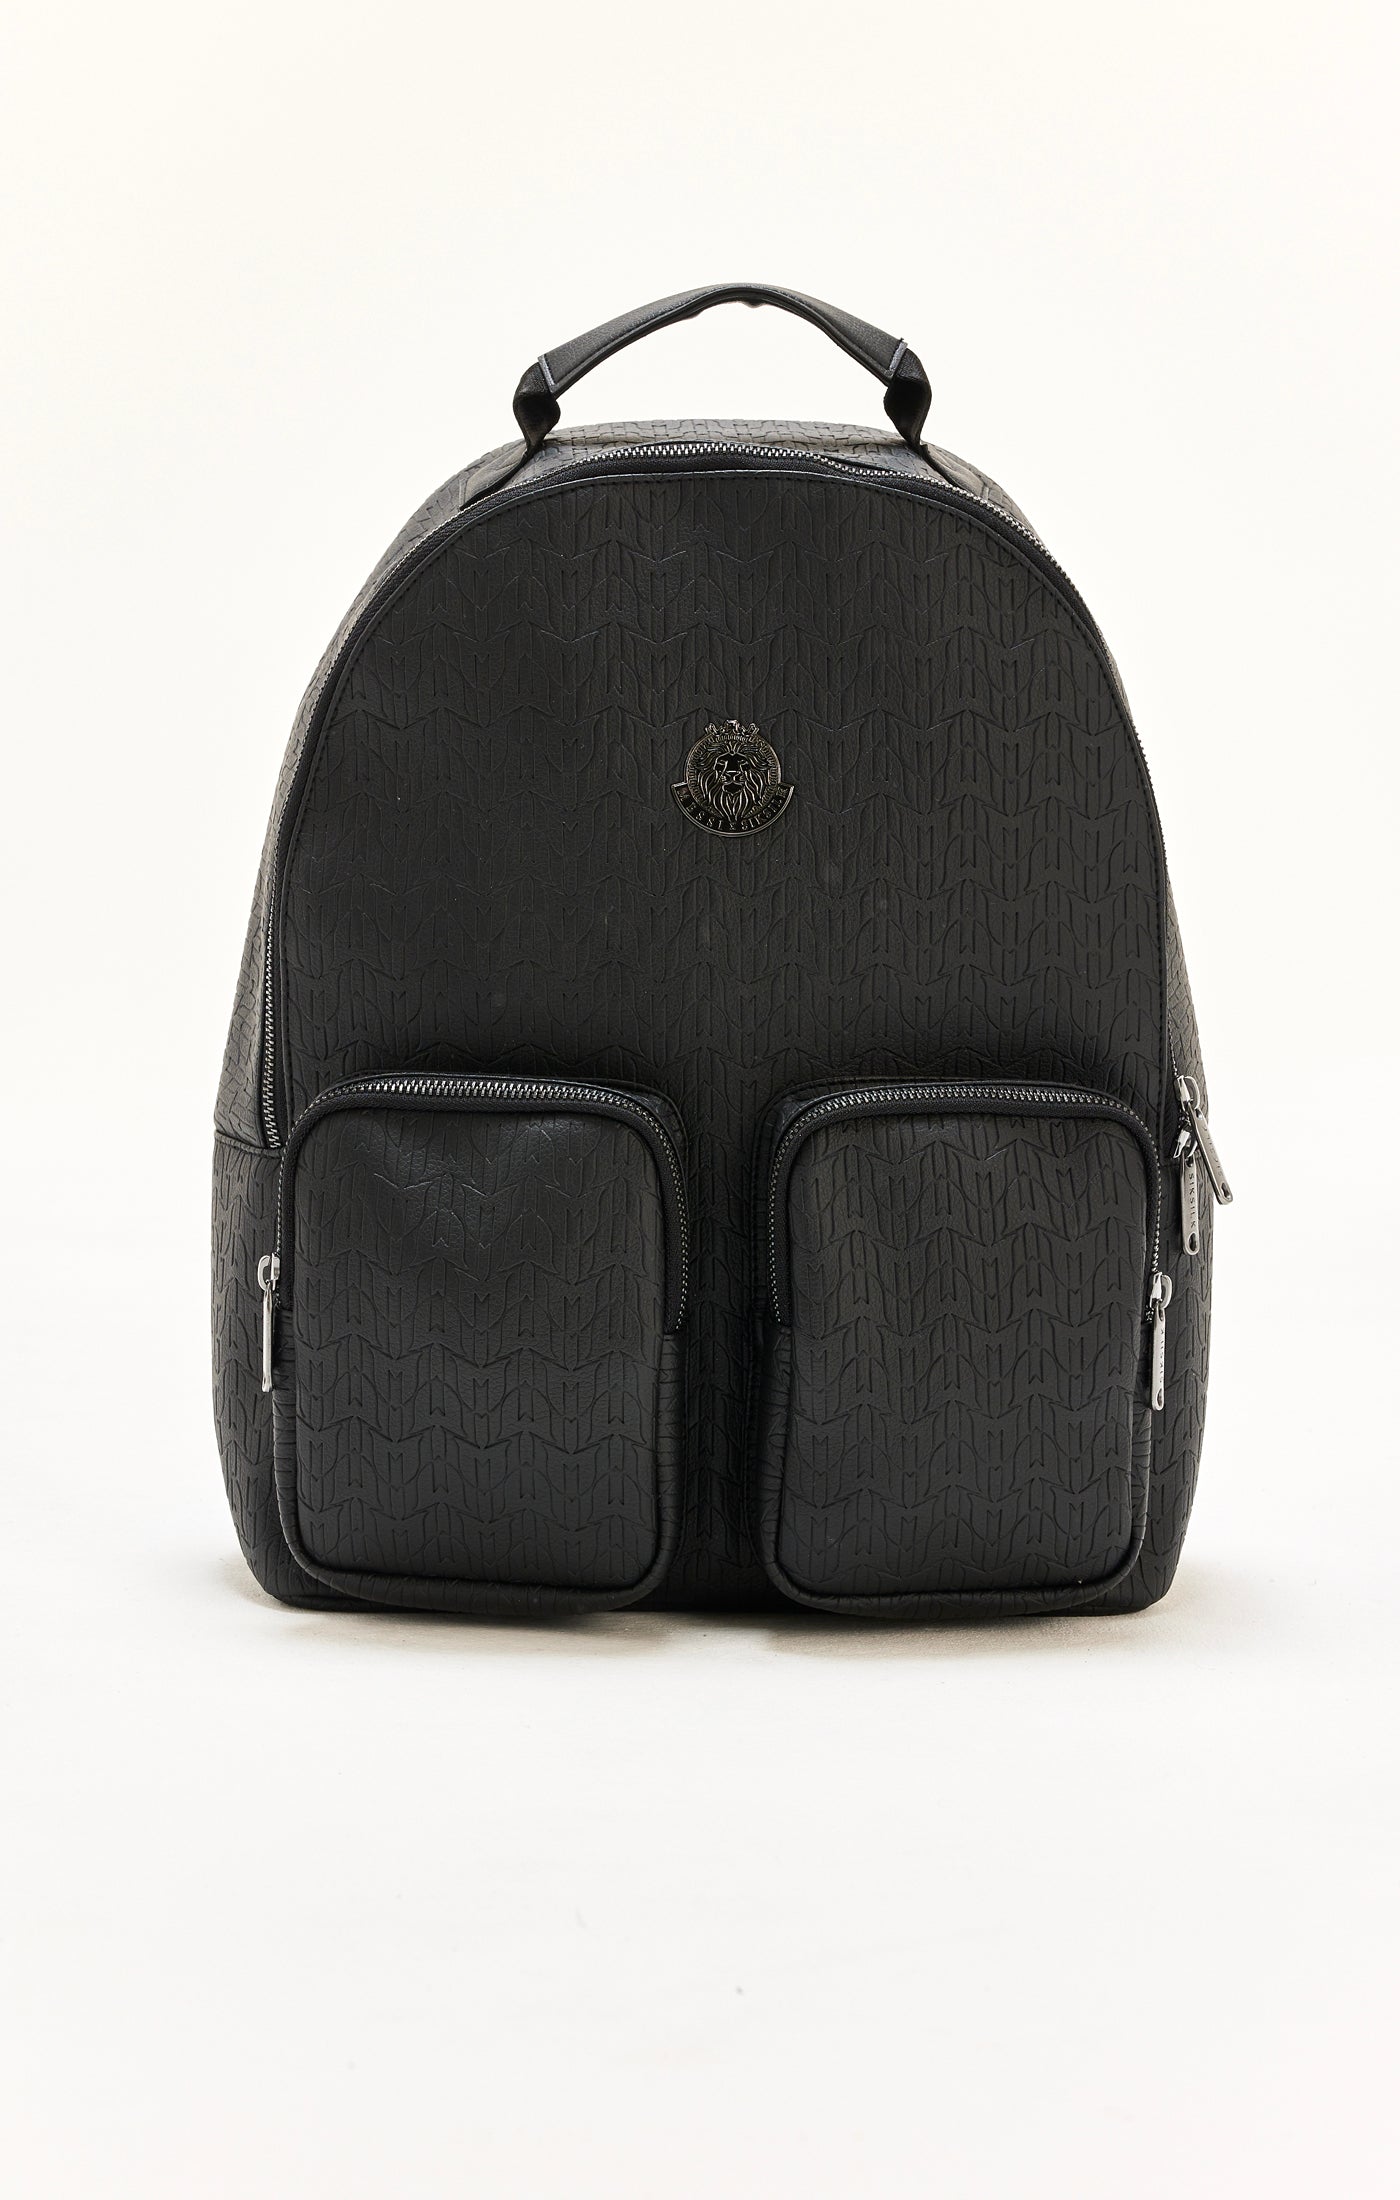 Load image into Gallery viewer, Messi x SikSilk Black Pu Branded Rucksack